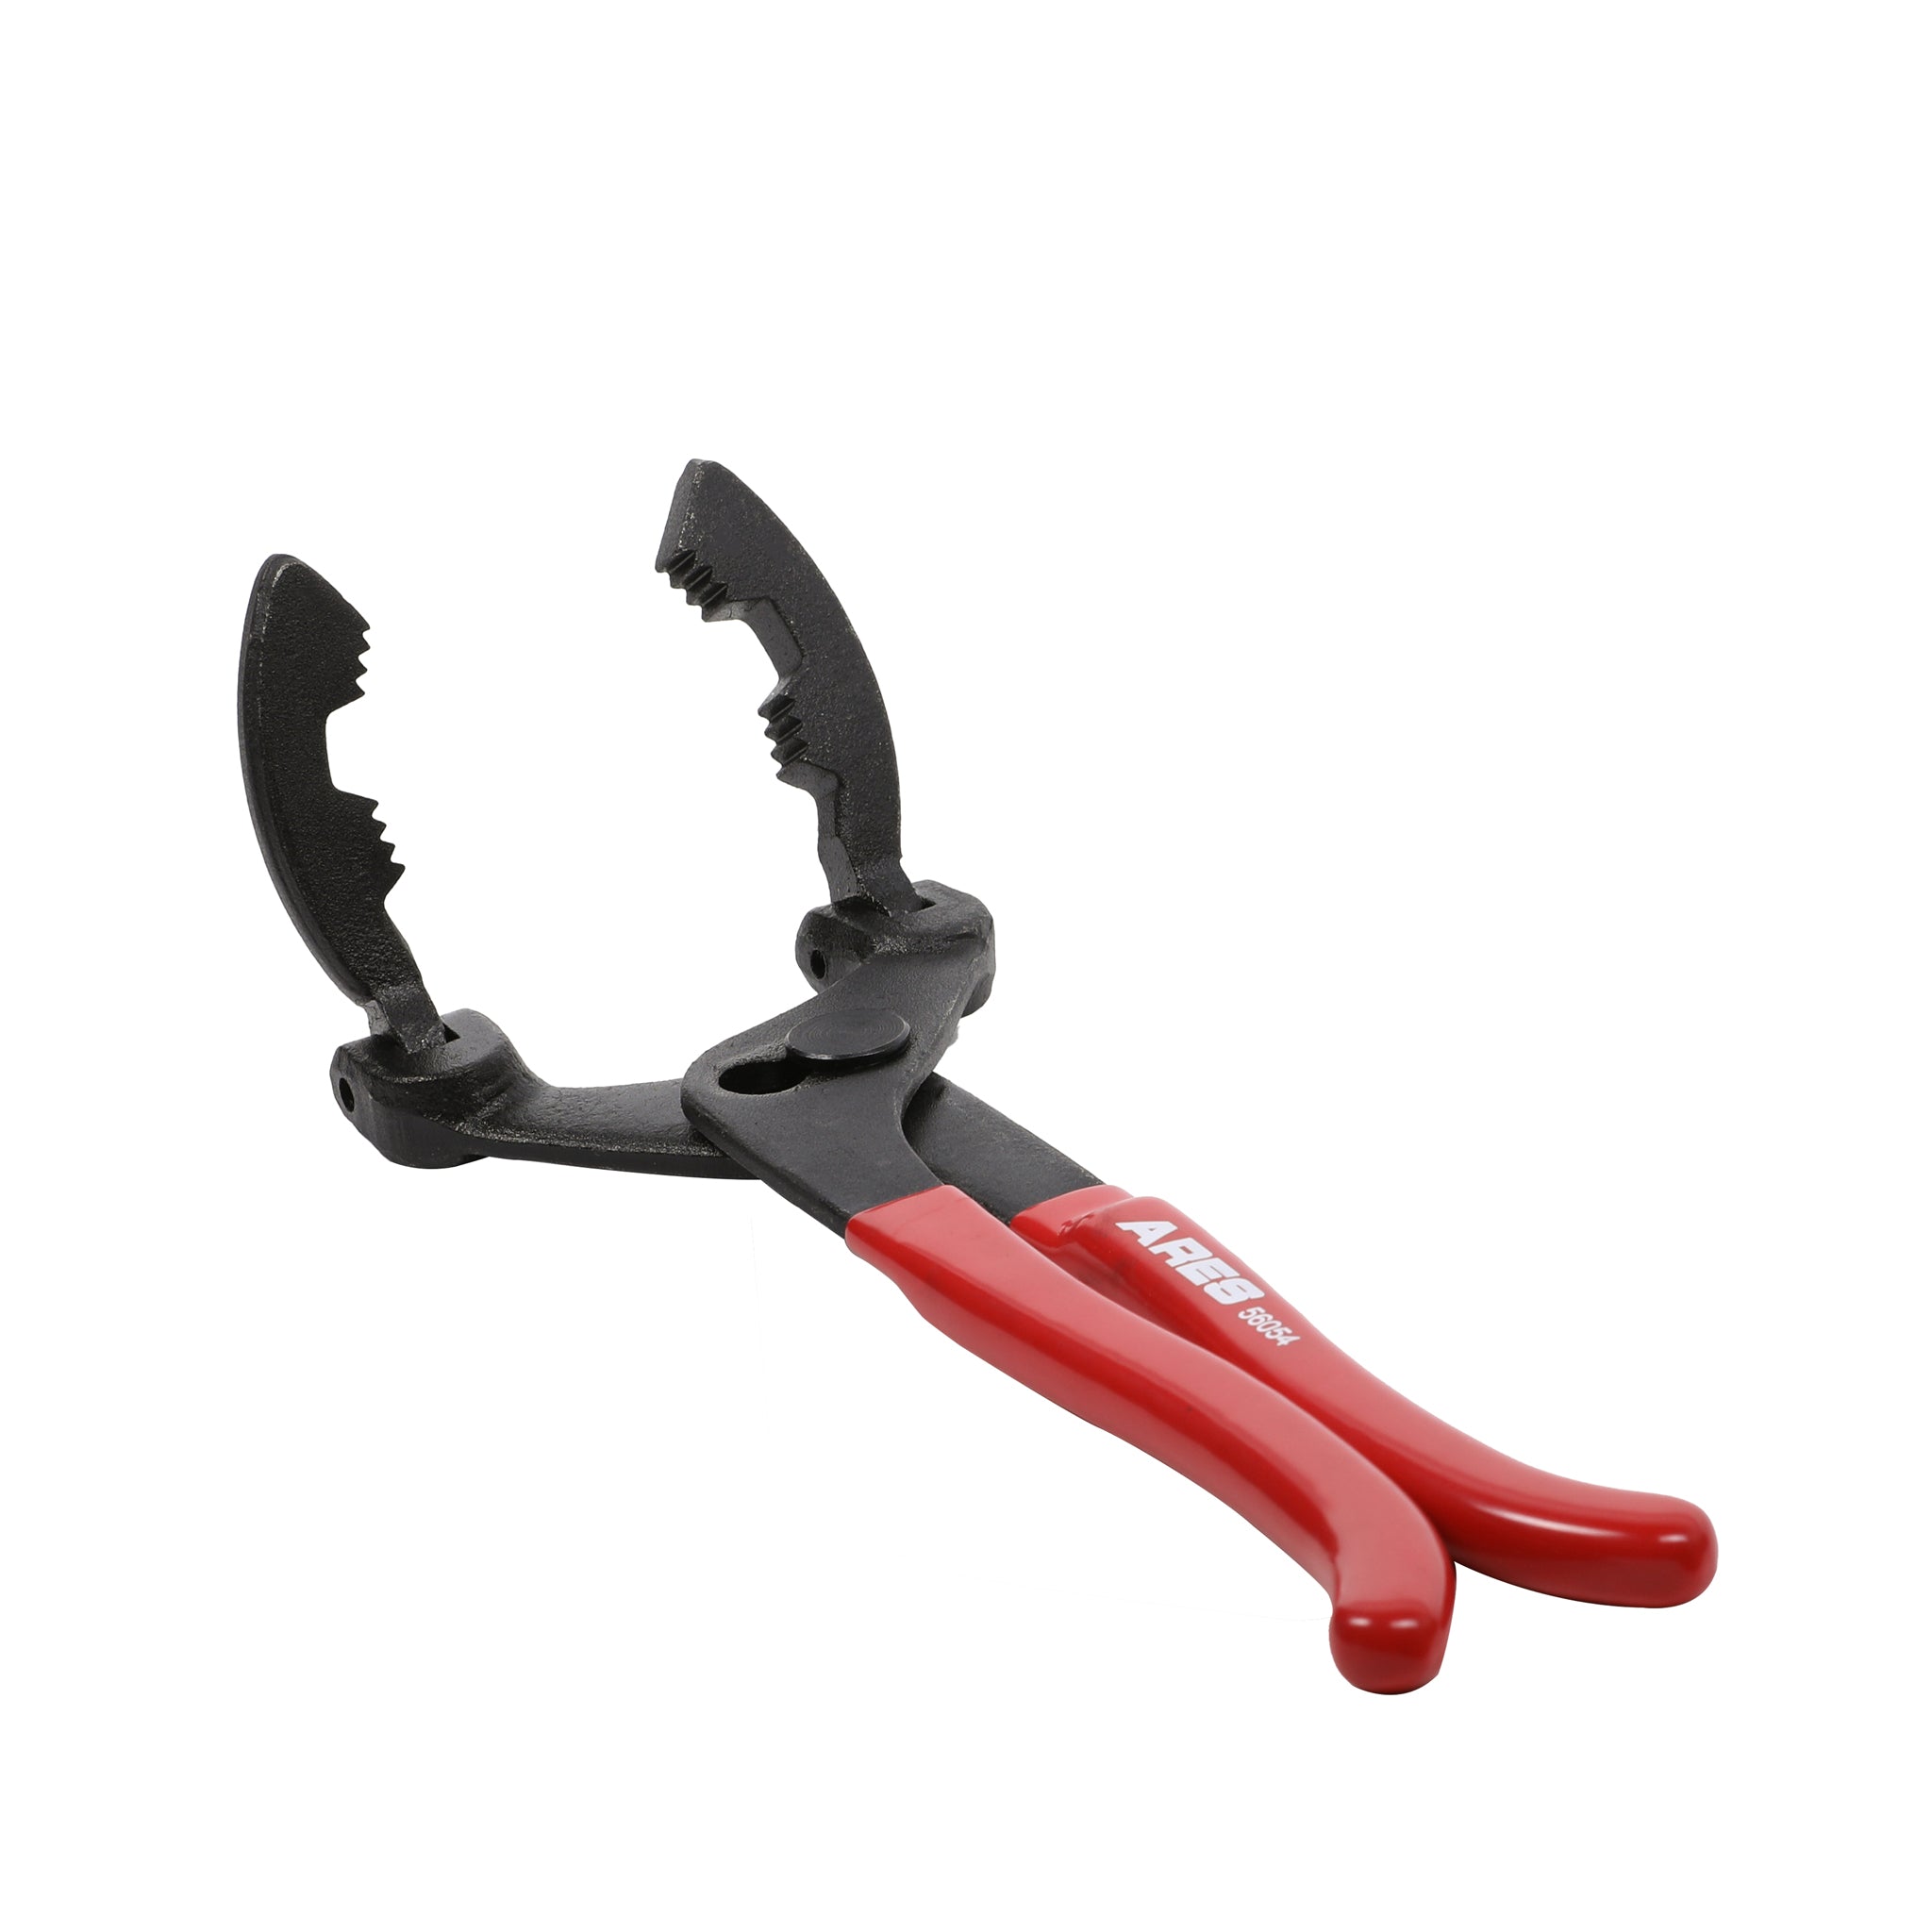 2-1/4 to 5-3/4 Adjustable Angle Oil Filter Pliers Oil Change 13 Plier